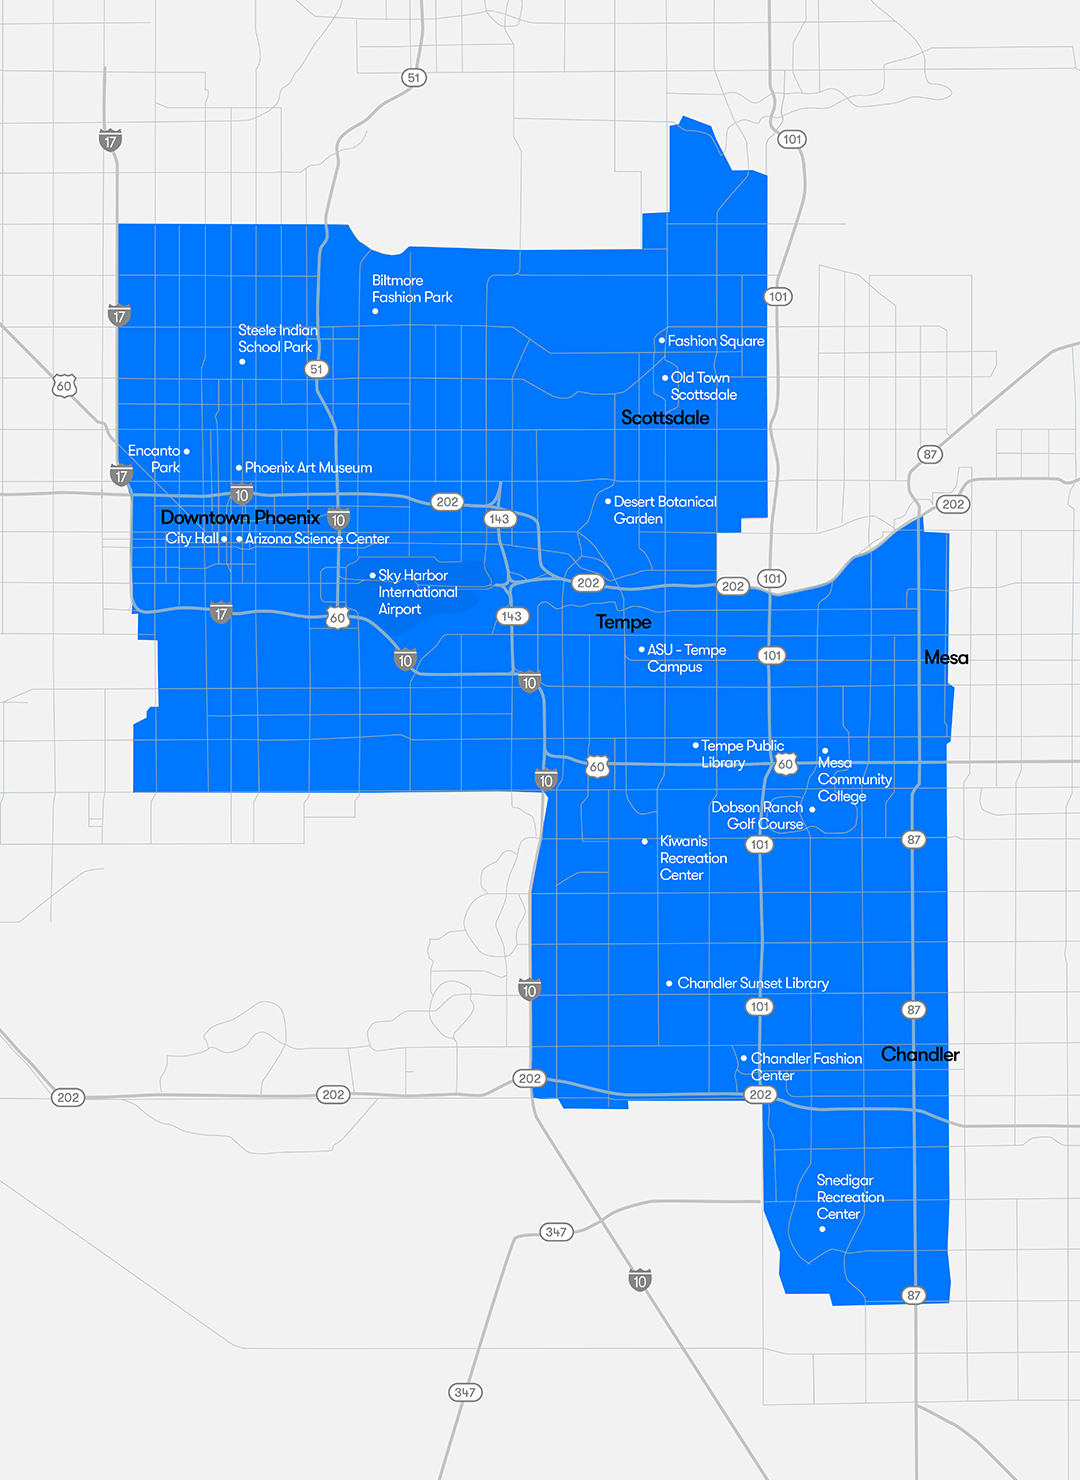 Territory map covering parts of Downtown Phoenix, Scottsdale, Tempe, Mesa, and Chandler.